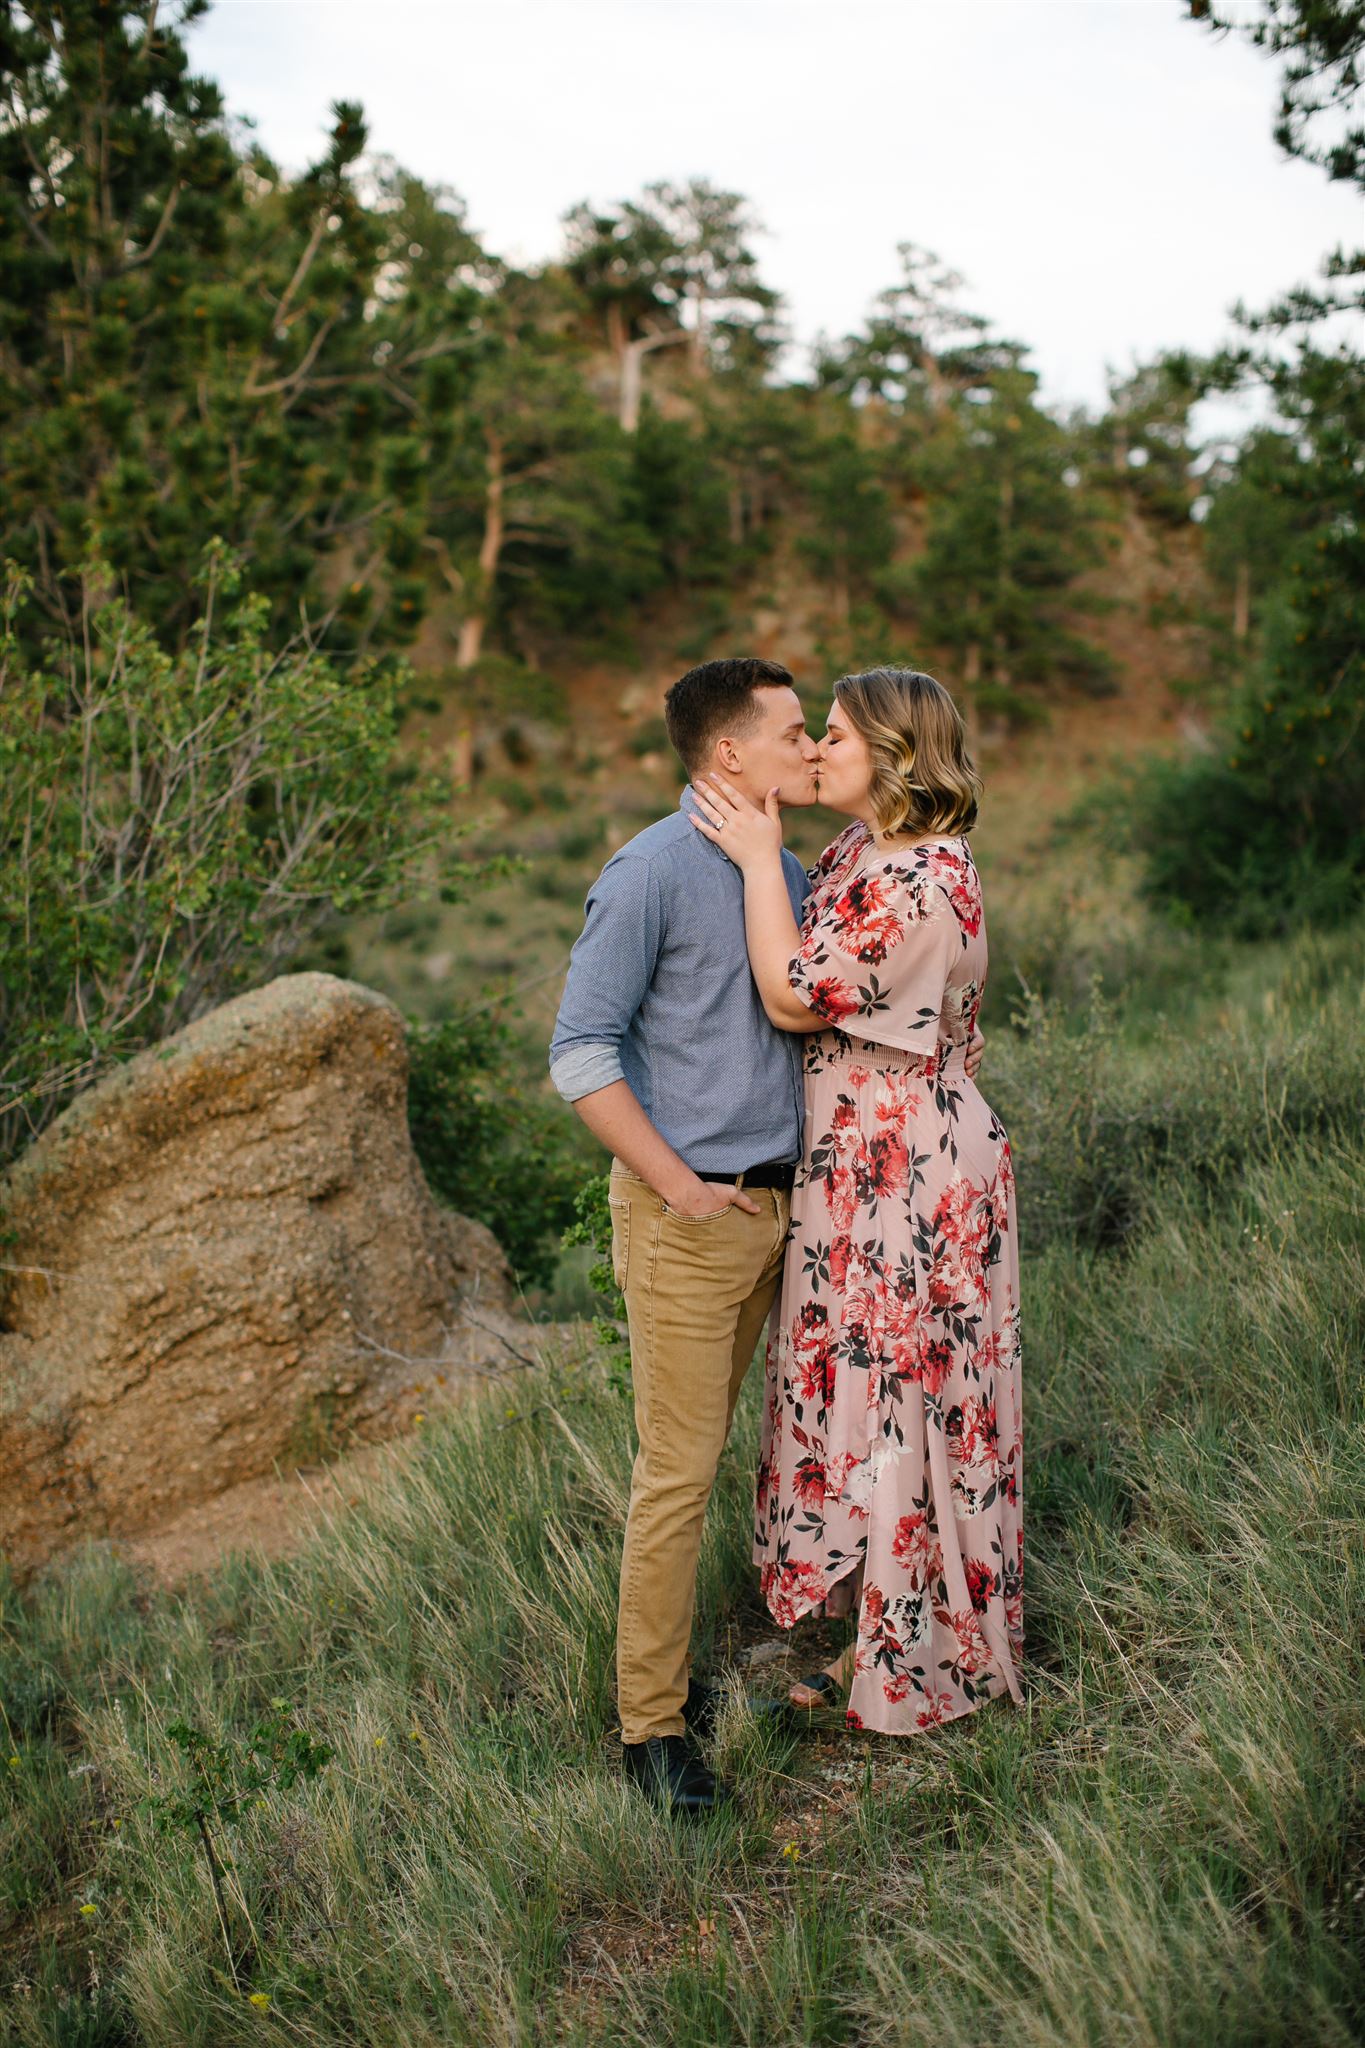 Looking For Ways To Create Unique Engagement Photos? –